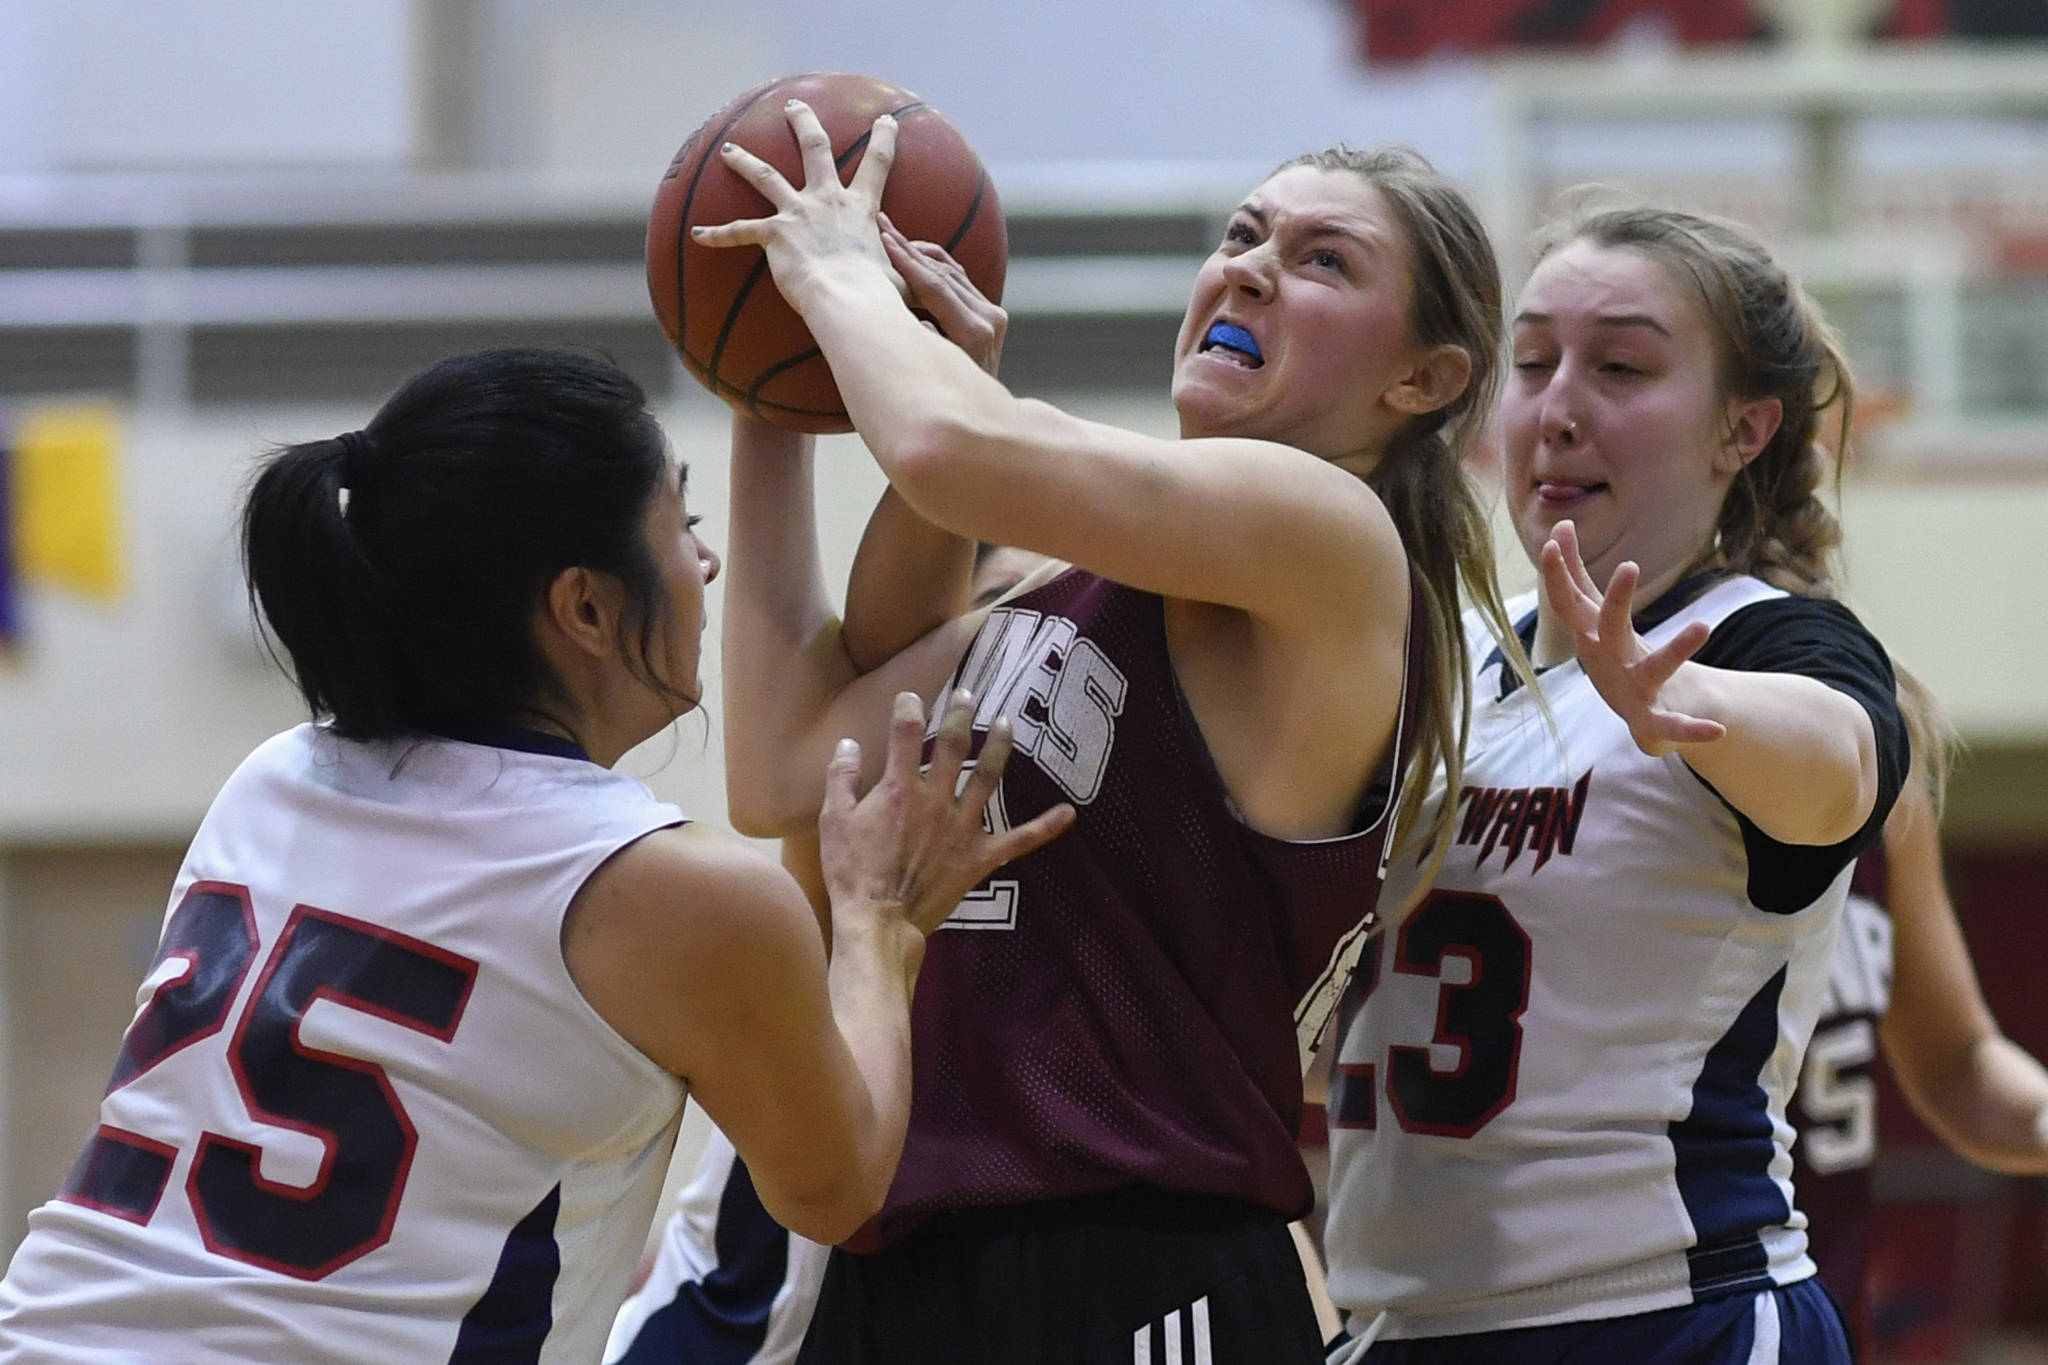 Haines’ Liz Segars, center, powers her way between Yakutat’s Violet Slatterly, left, and Janie Jensen during their women’s bracket game at the Juneau Lions Club 73rd Annual Gold Medal Basketball Tournament at Juneau-Douglas High School on Friday, March 22, 2019. Haines won 64-48. (Michael Penn | Juneau Empire)